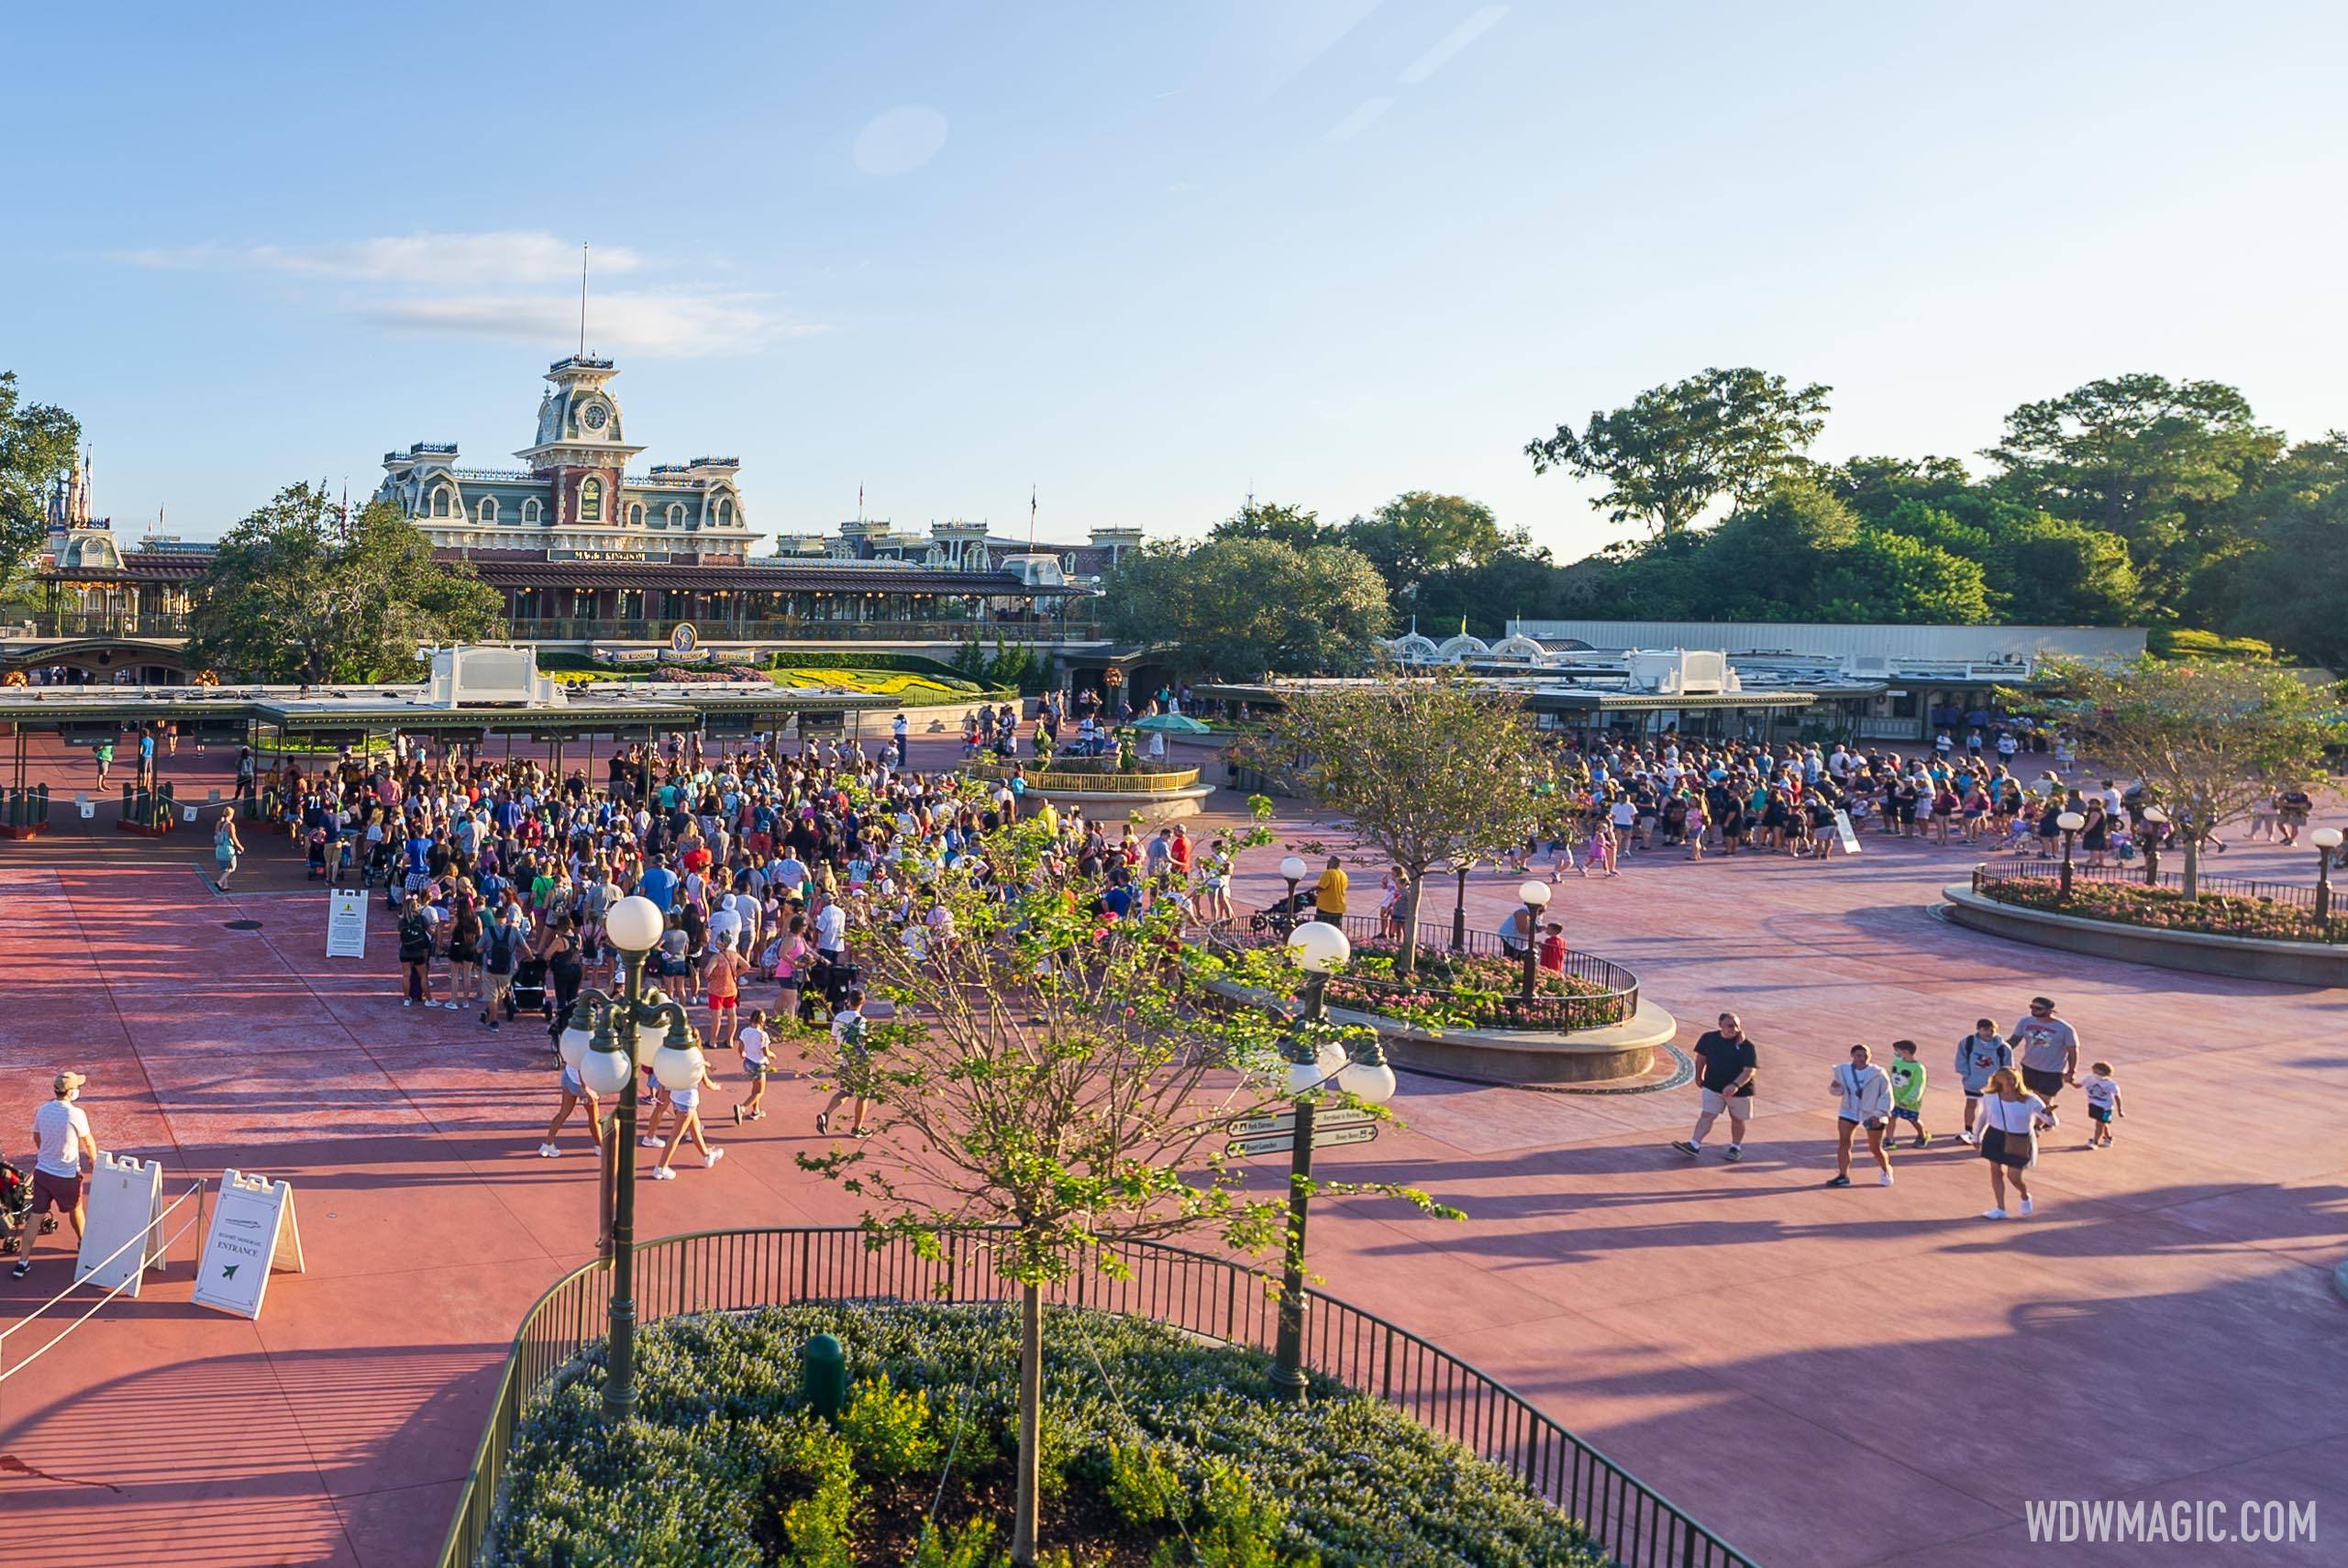 Two more offsite hotels join Disney hotels with eligibility for Early Theme Park Entry at Walt Disney World through 2024